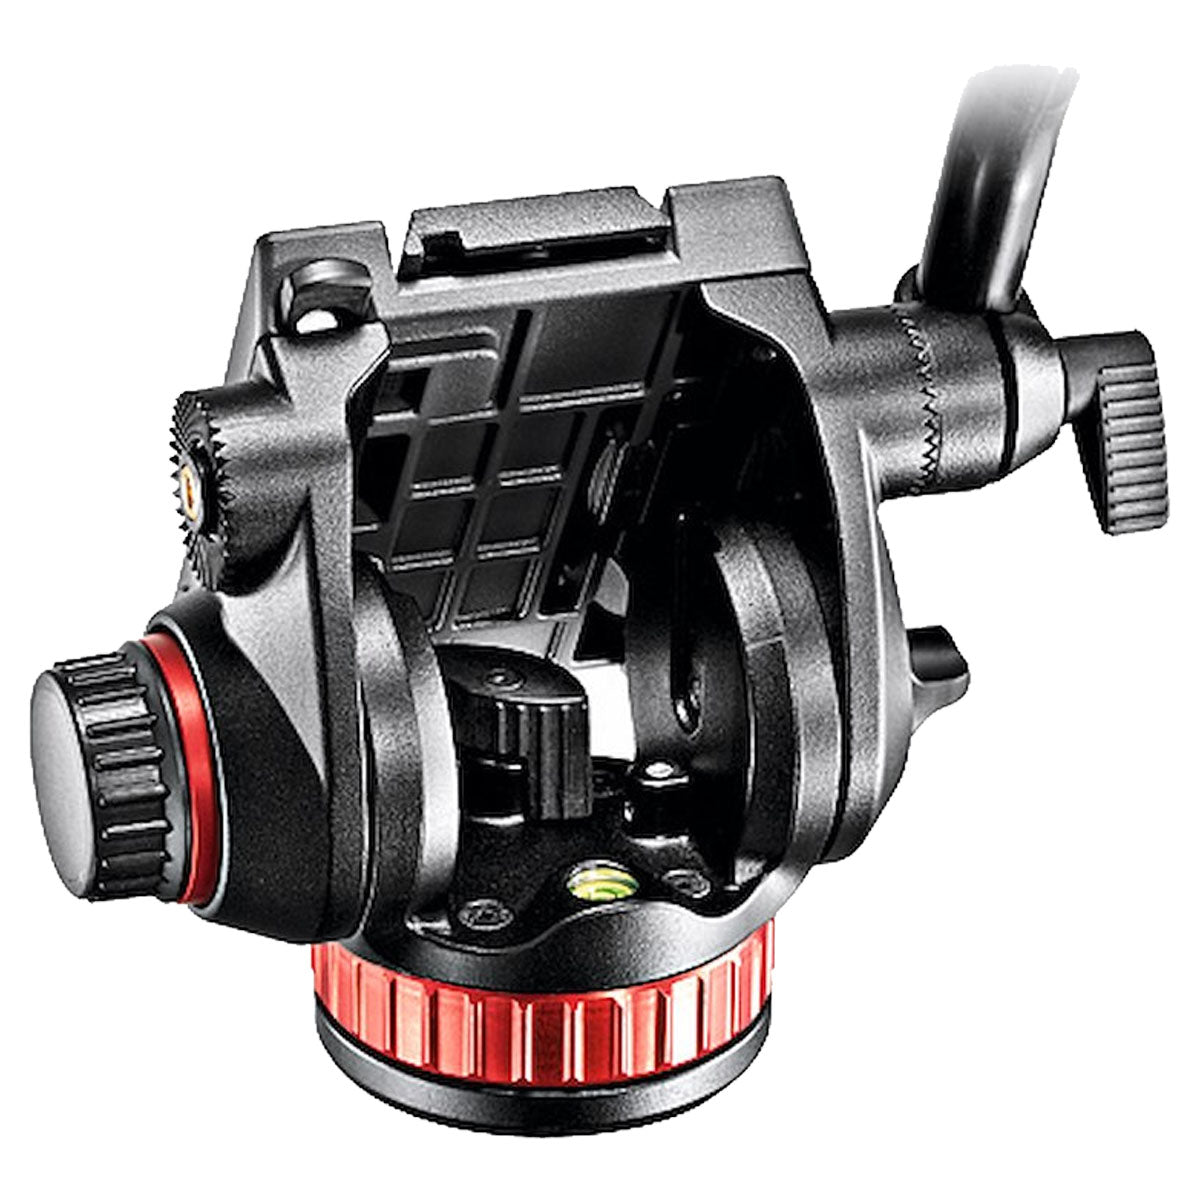 Manfrotto 502 Fluid Video Head w/ Flat Base in  by GOHUNT | Manfrotto - GOHUNT Shop